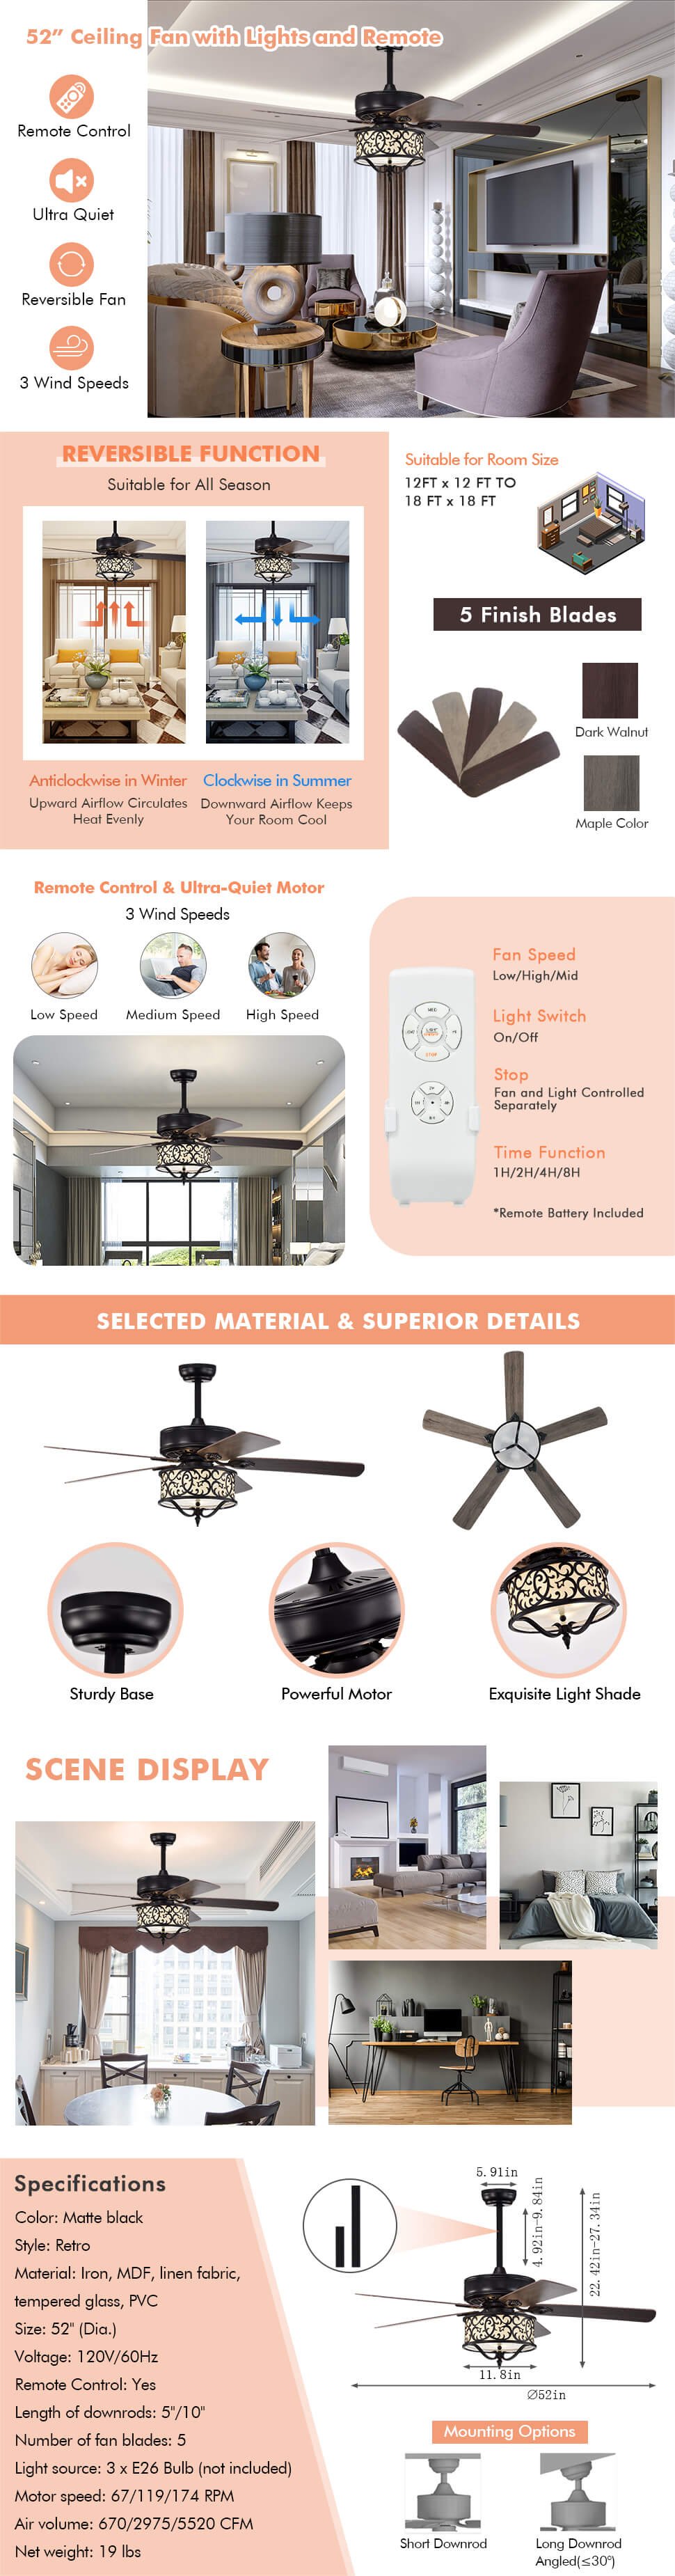 52 Inches Light Retro Ceiling Fan with Reversible Blades